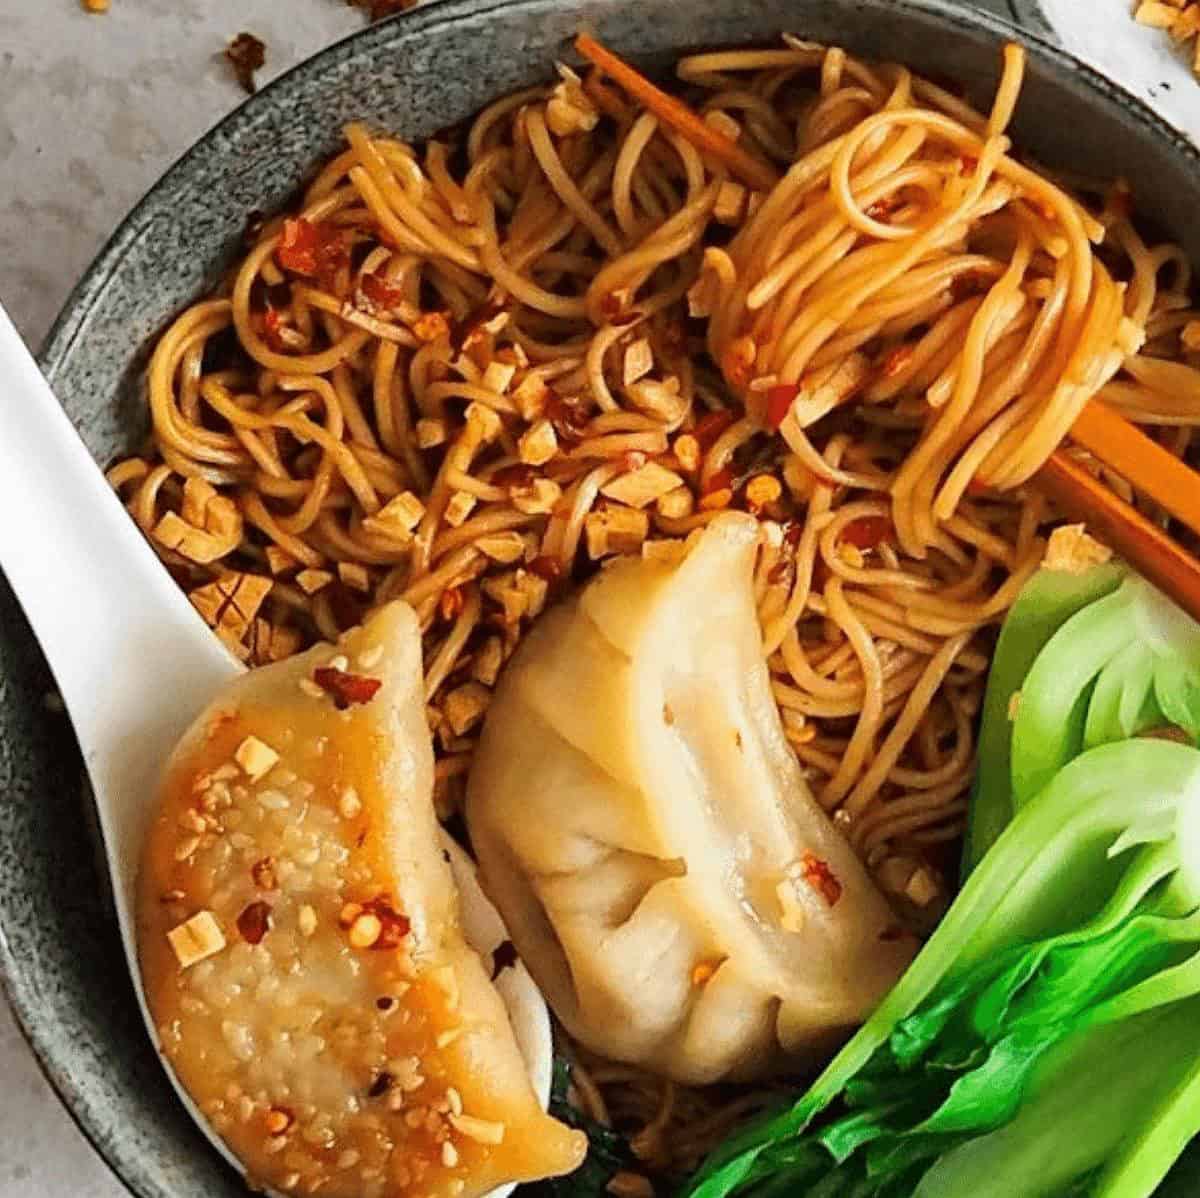  Your taste buds are in for a treat with this wonton noodle dish.